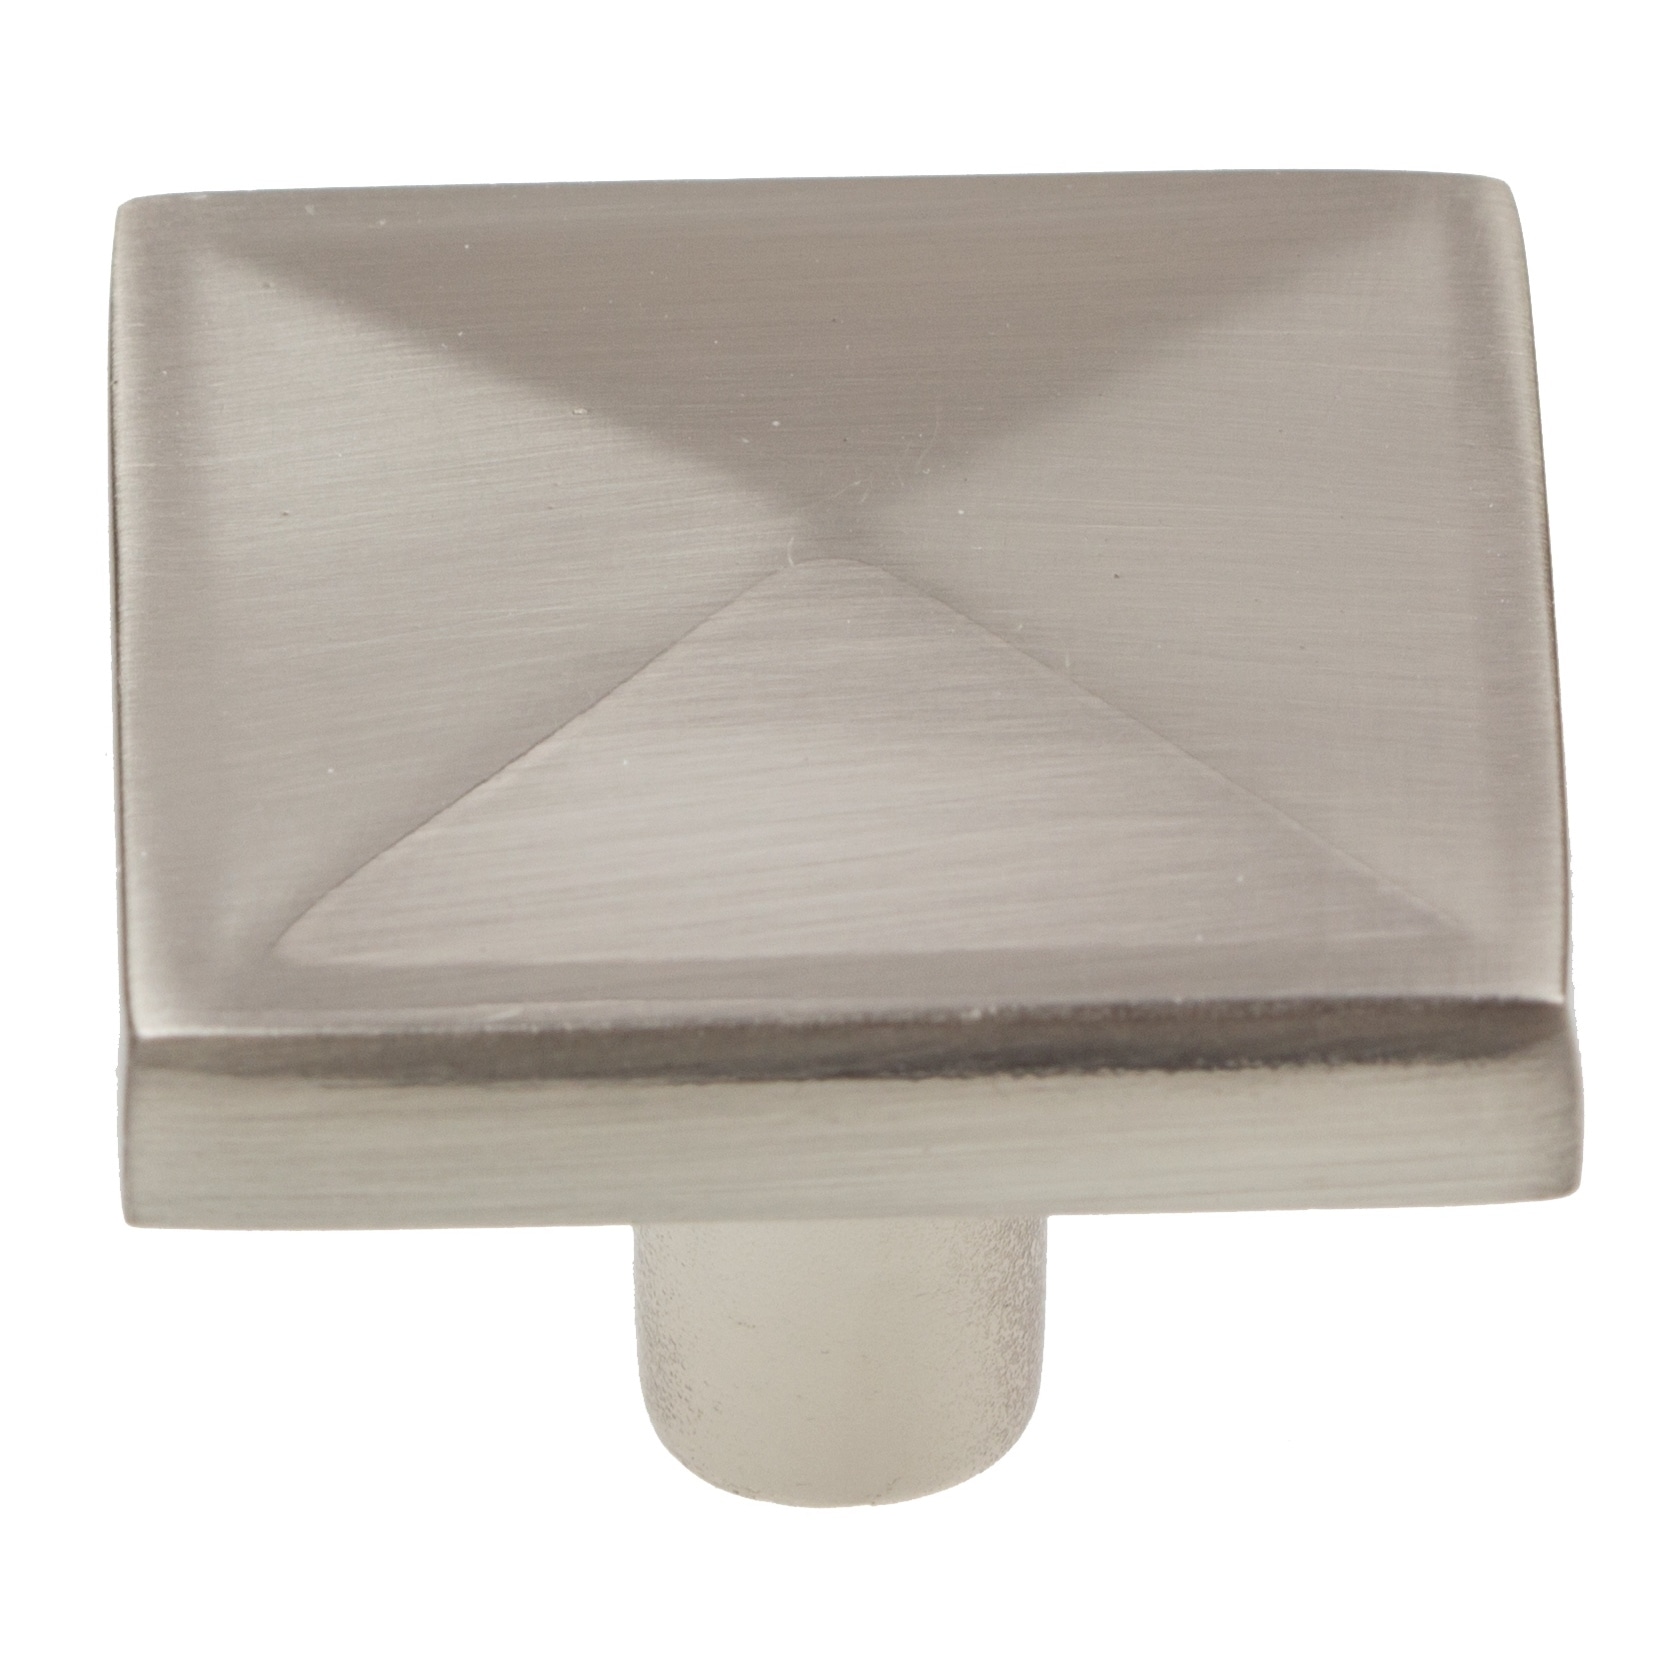 GlideRite 1-1/4 in. Classic Square Pyramid Cabinet Knobs, Satin Nickel, Pack of 25 - image 1 of 5